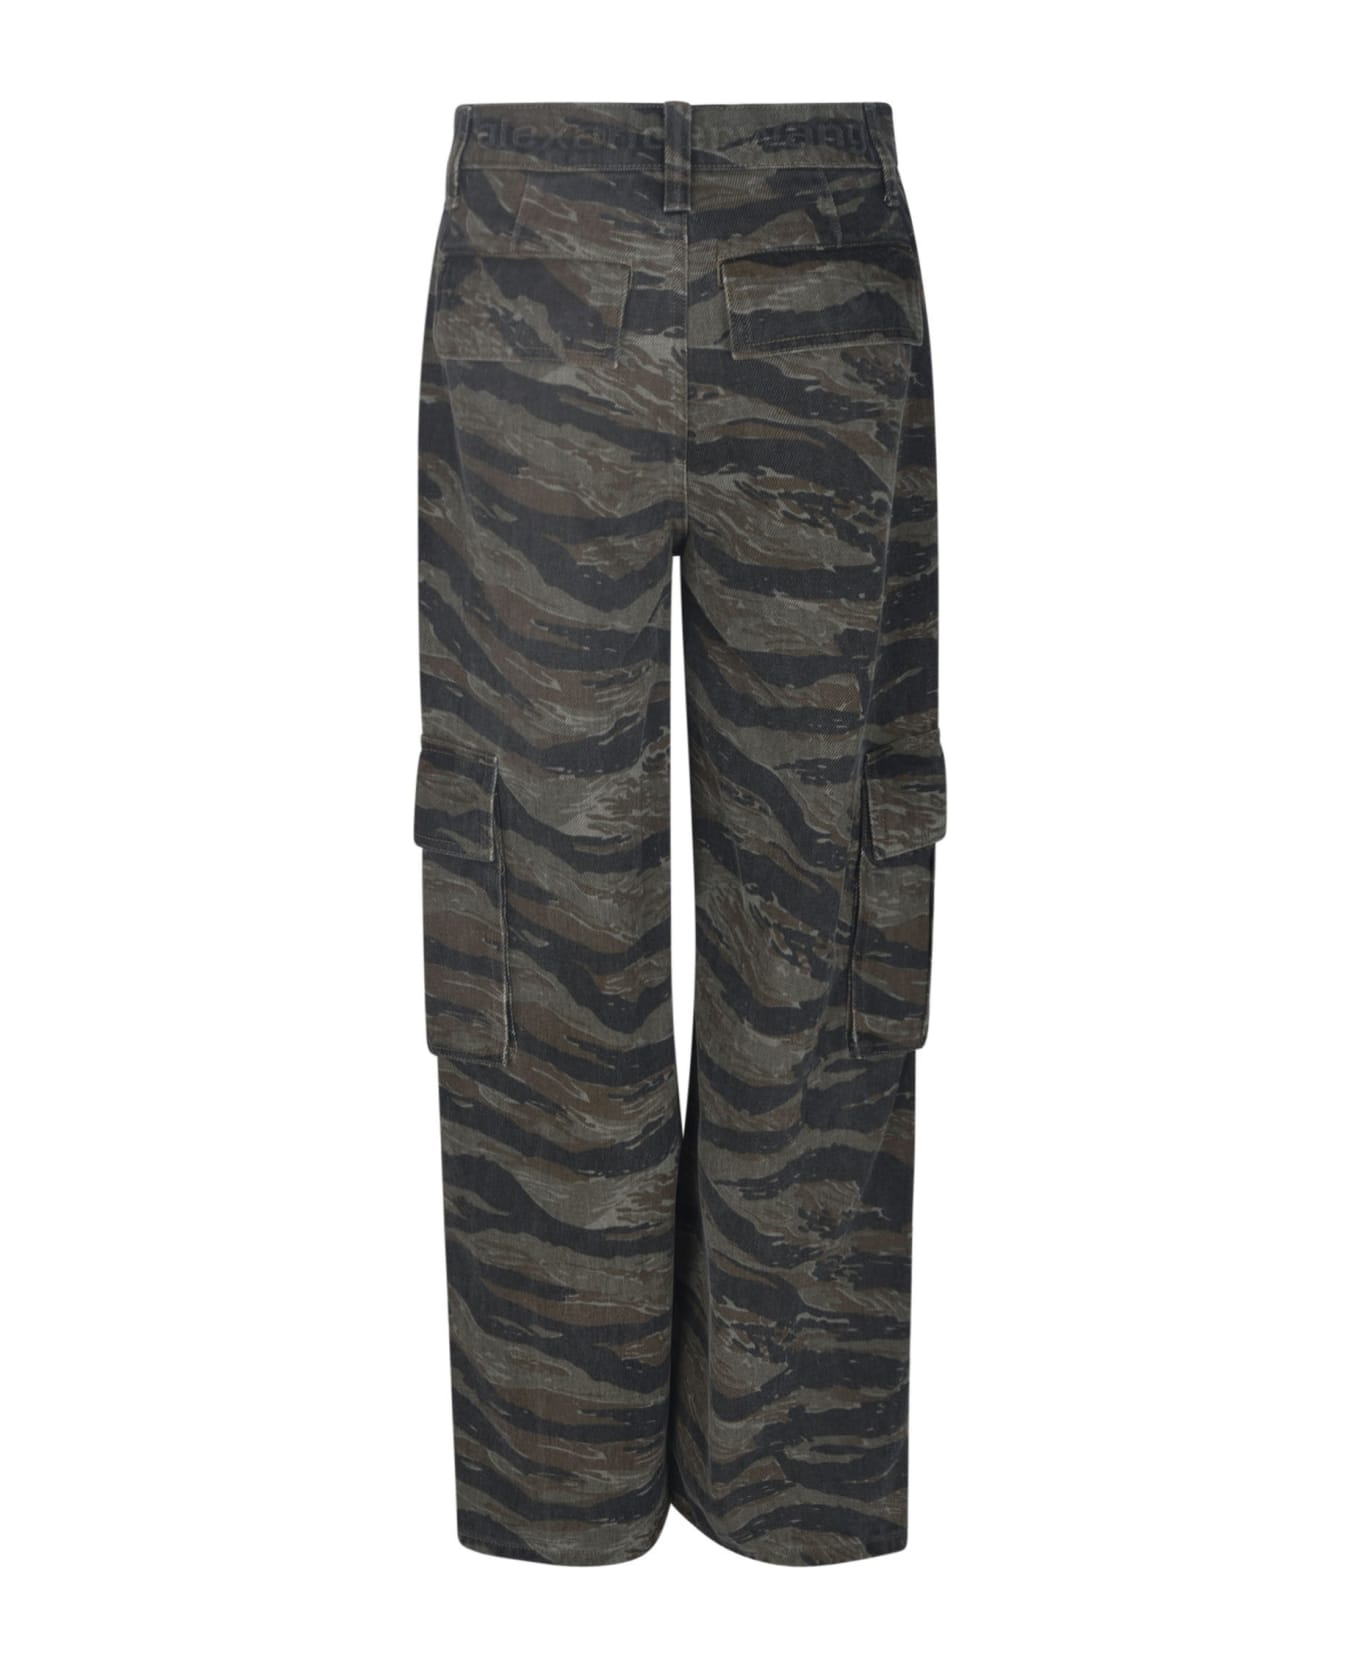 Alexander Wang Bagged Out Pocket Jeans - Camo